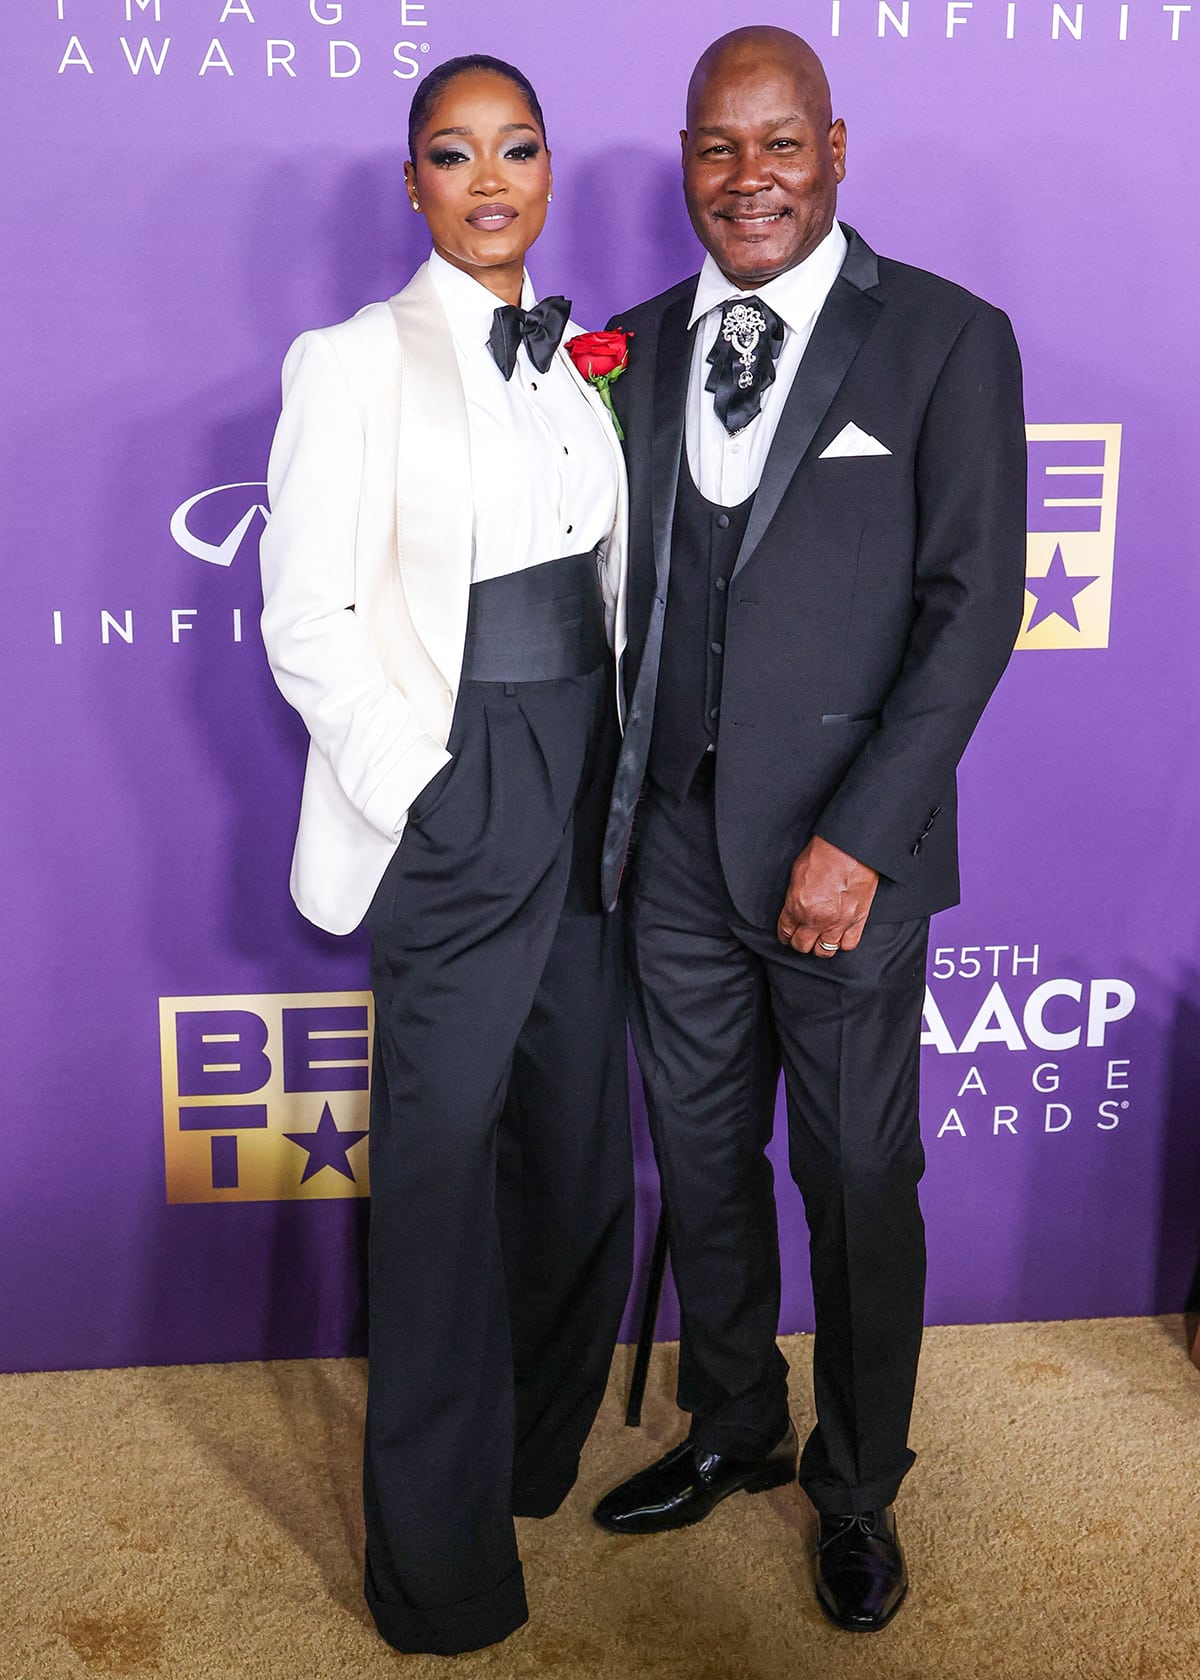 Keke Palmer is joined on the NAACP Image Awards red carpet by her father Larry Palmer who looks dapper in a three-piece suit